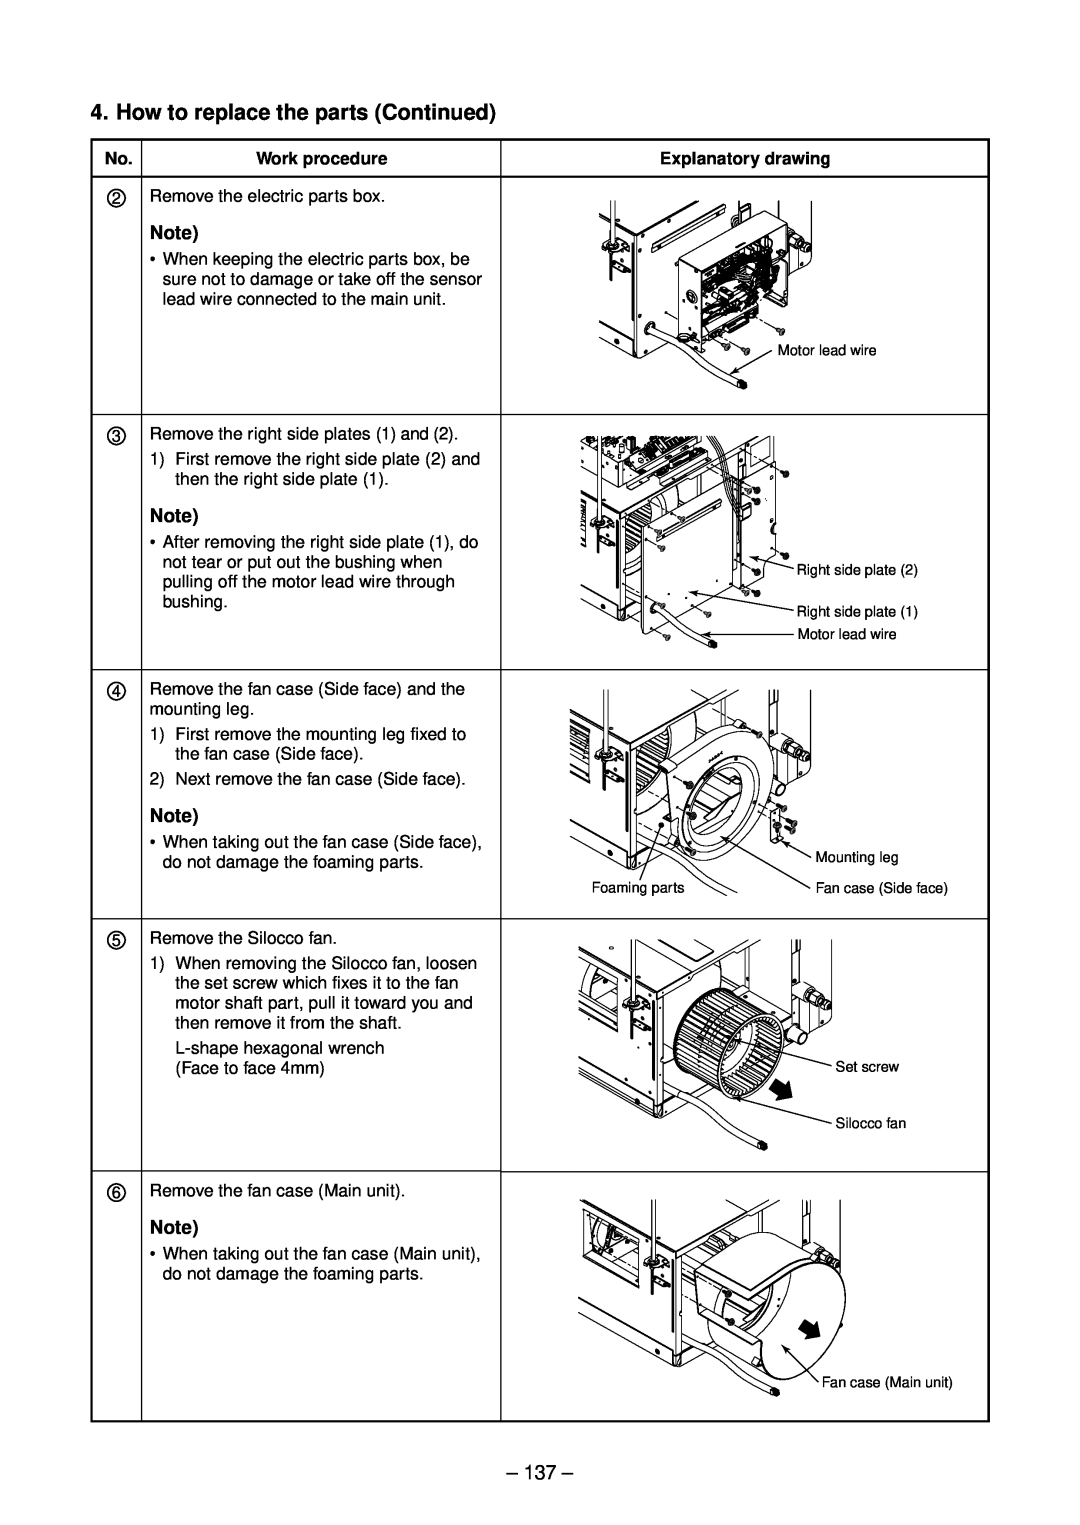 Toshiba RAV-SM1603ATZG-E, RAV-SM1603DT-A How to replace the parts Continued, 137, Work procedure, Explanatory drawing 